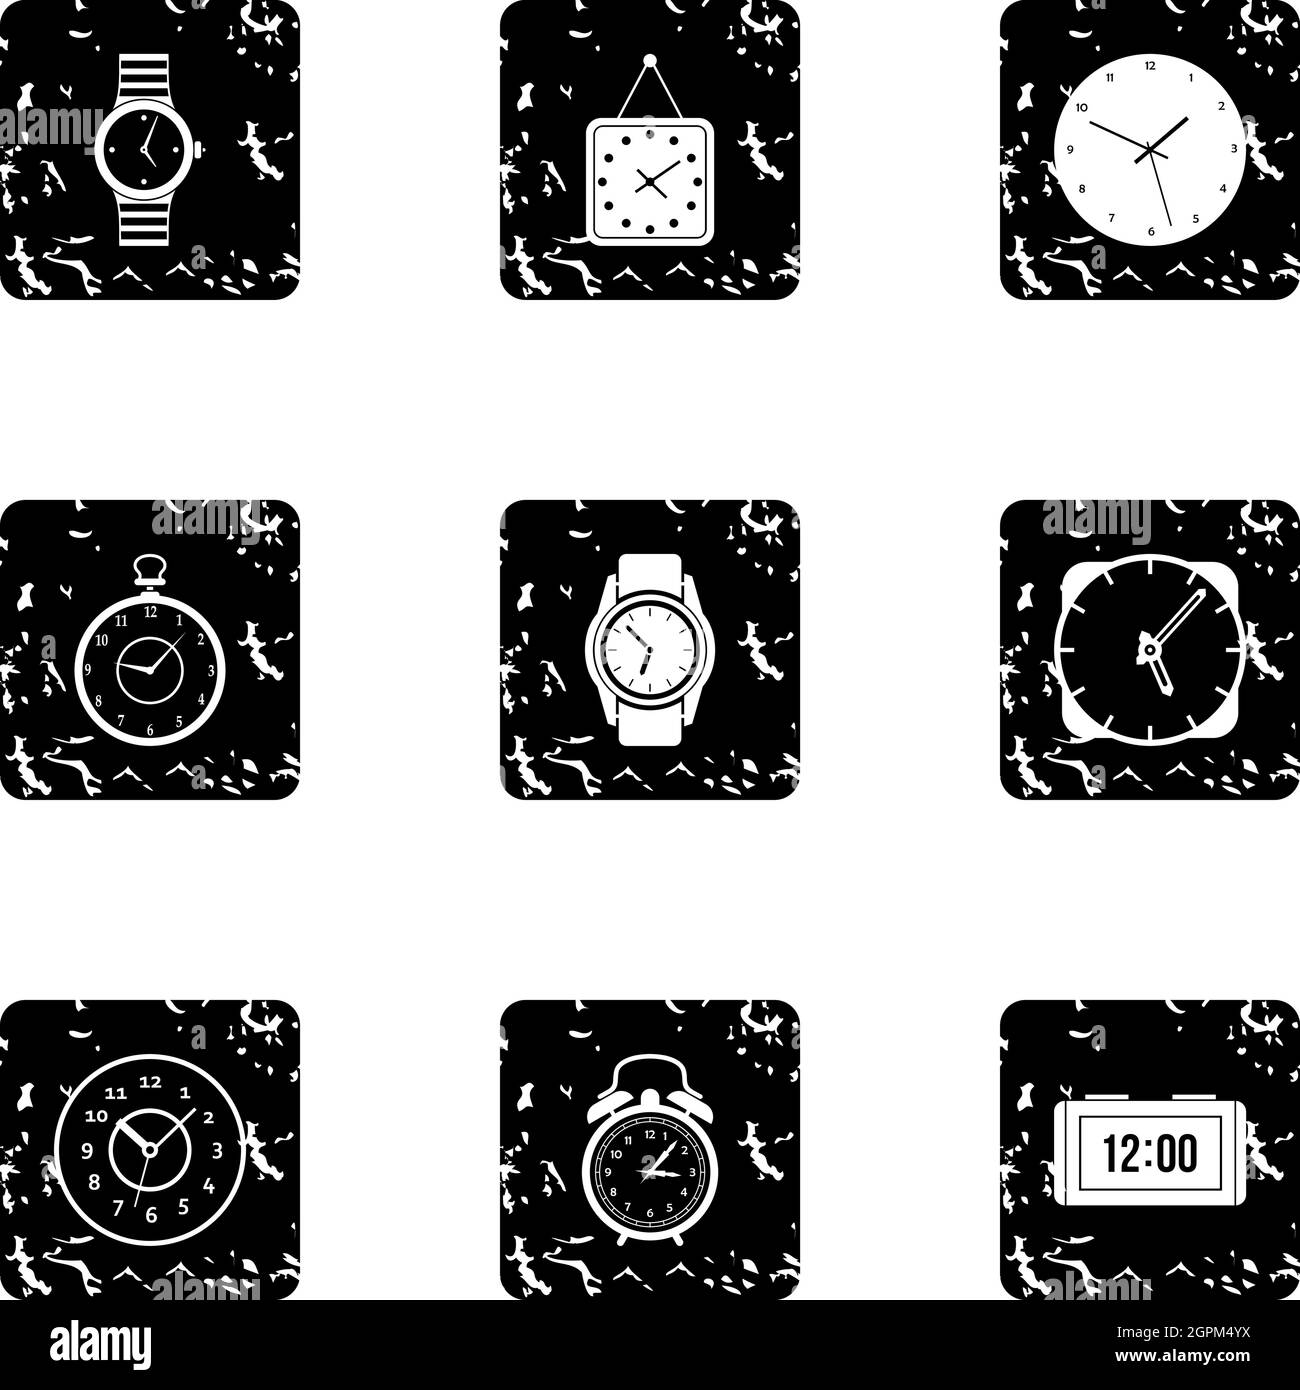 Electronic watch icons set, grunge style Stock Vector